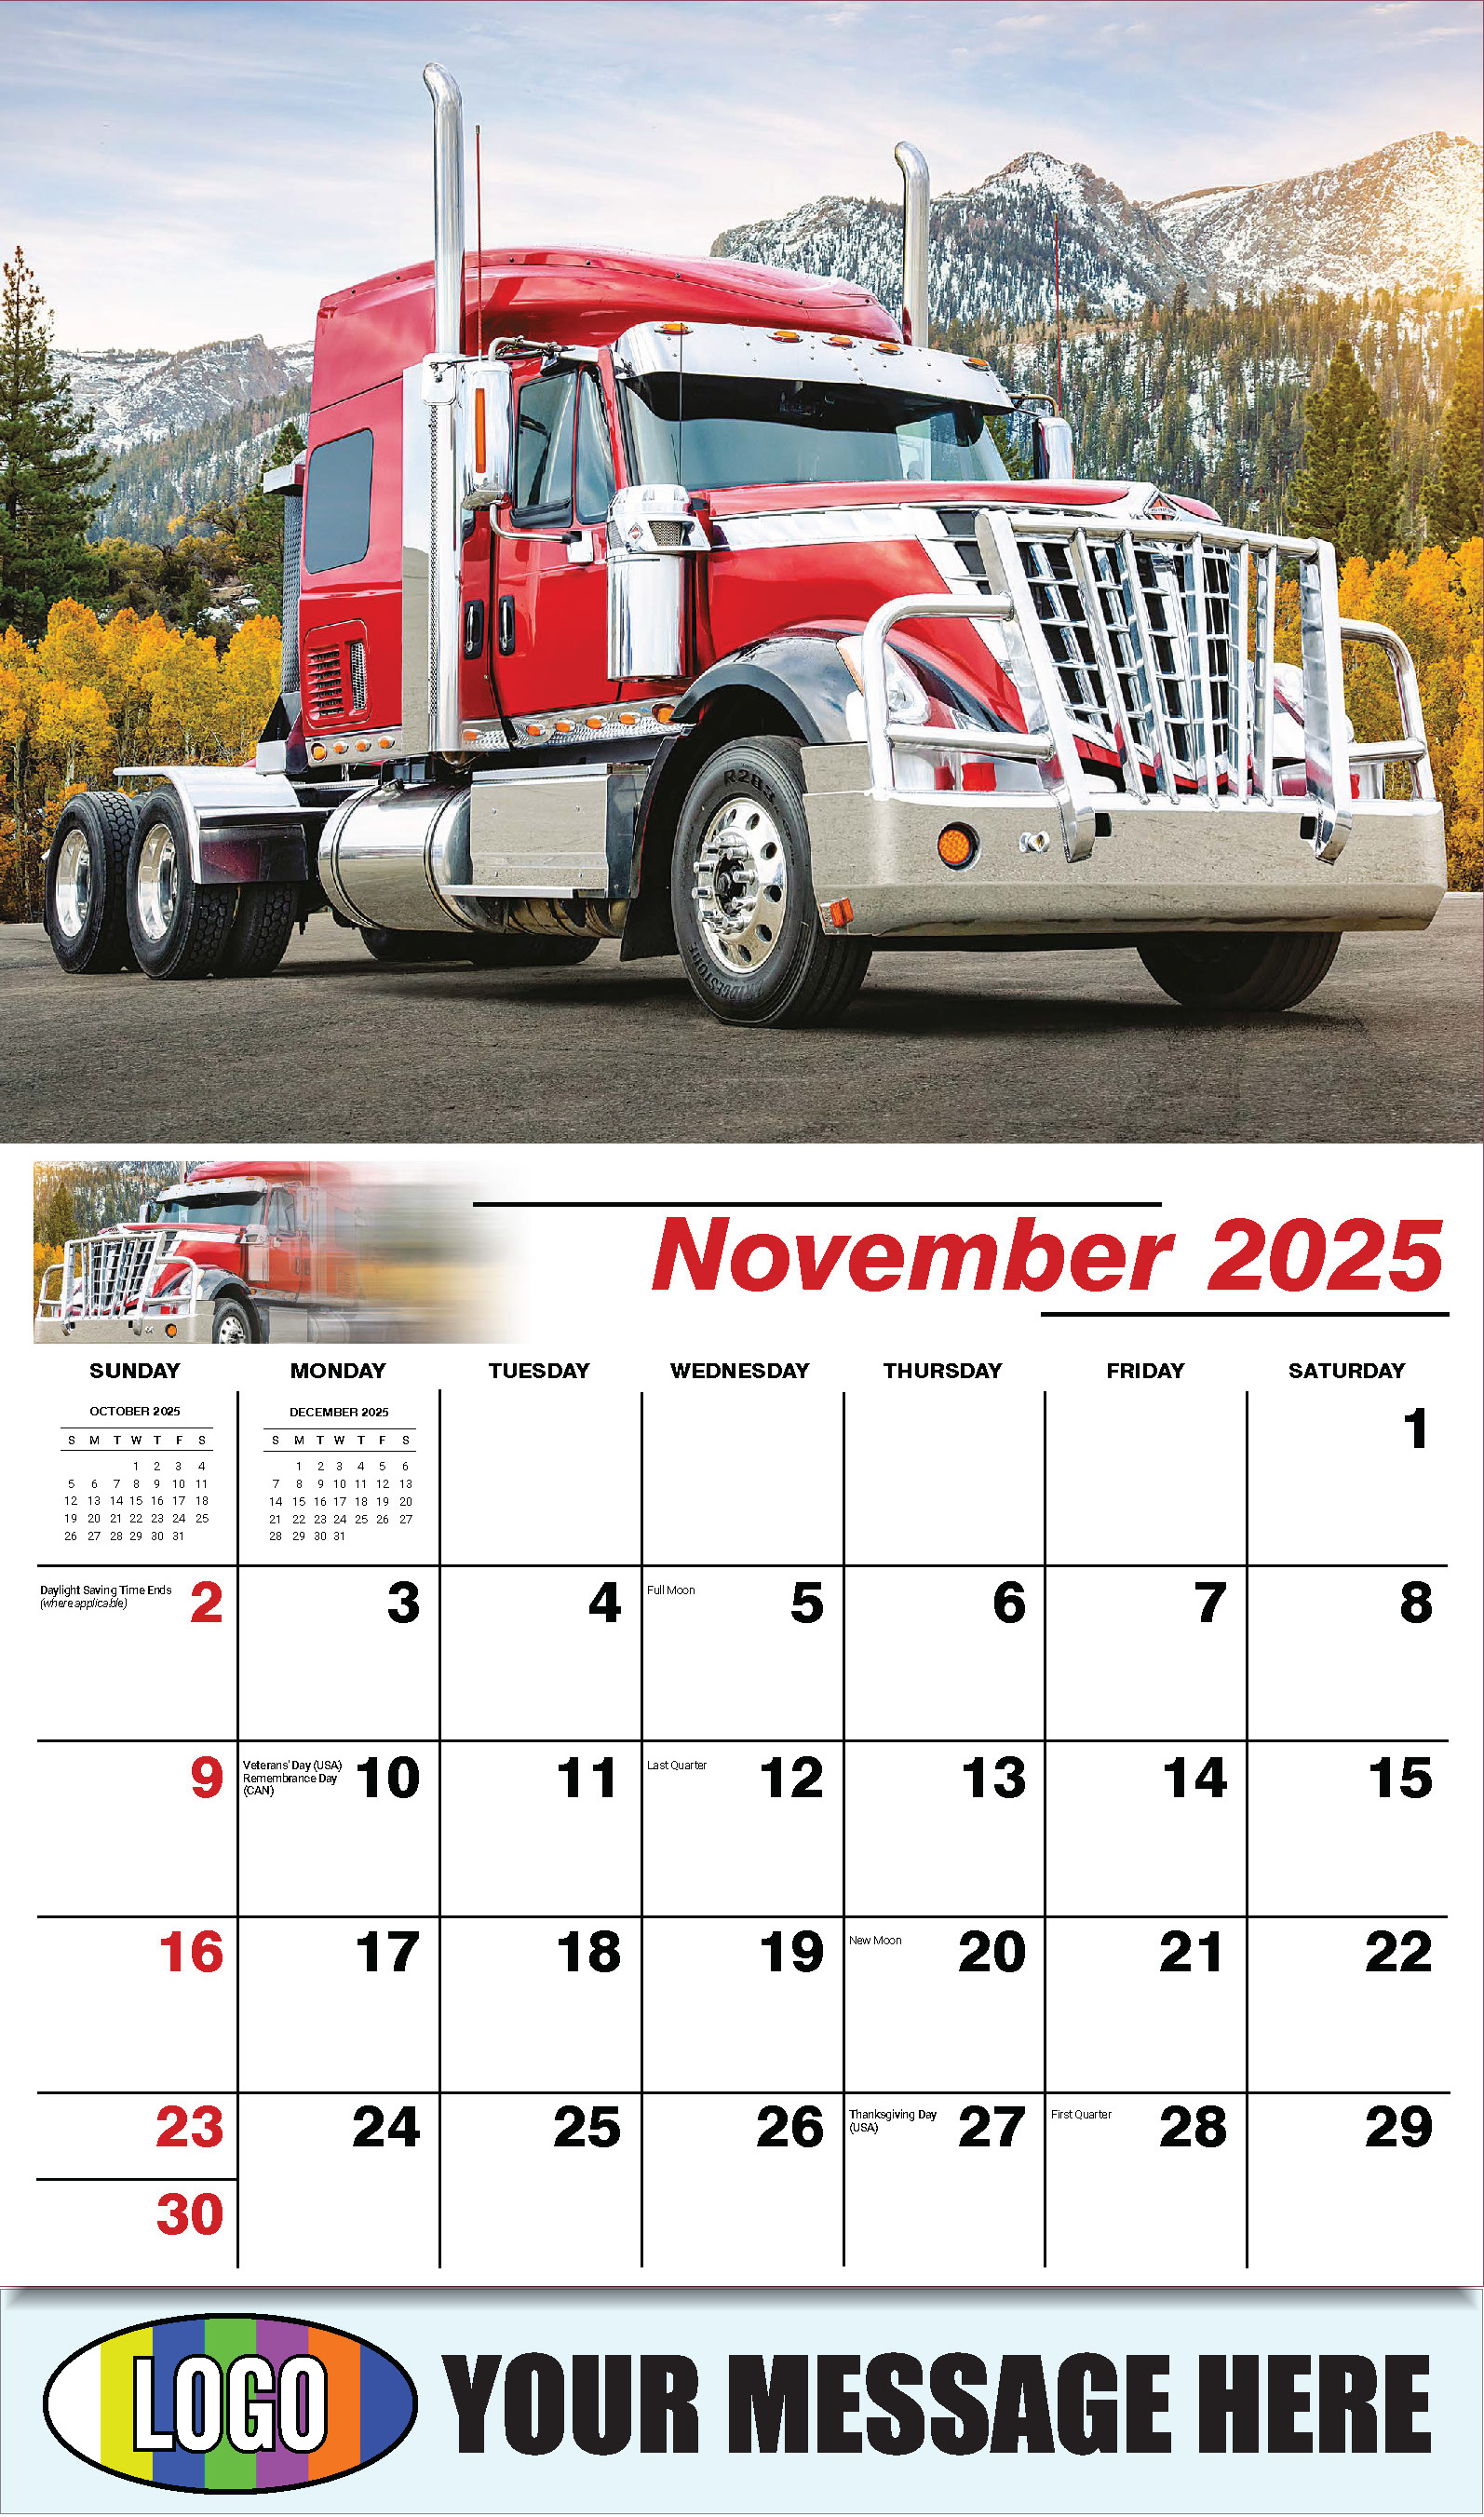 Kings of the Road 2025 Automotive Business Promotional Calendar - November